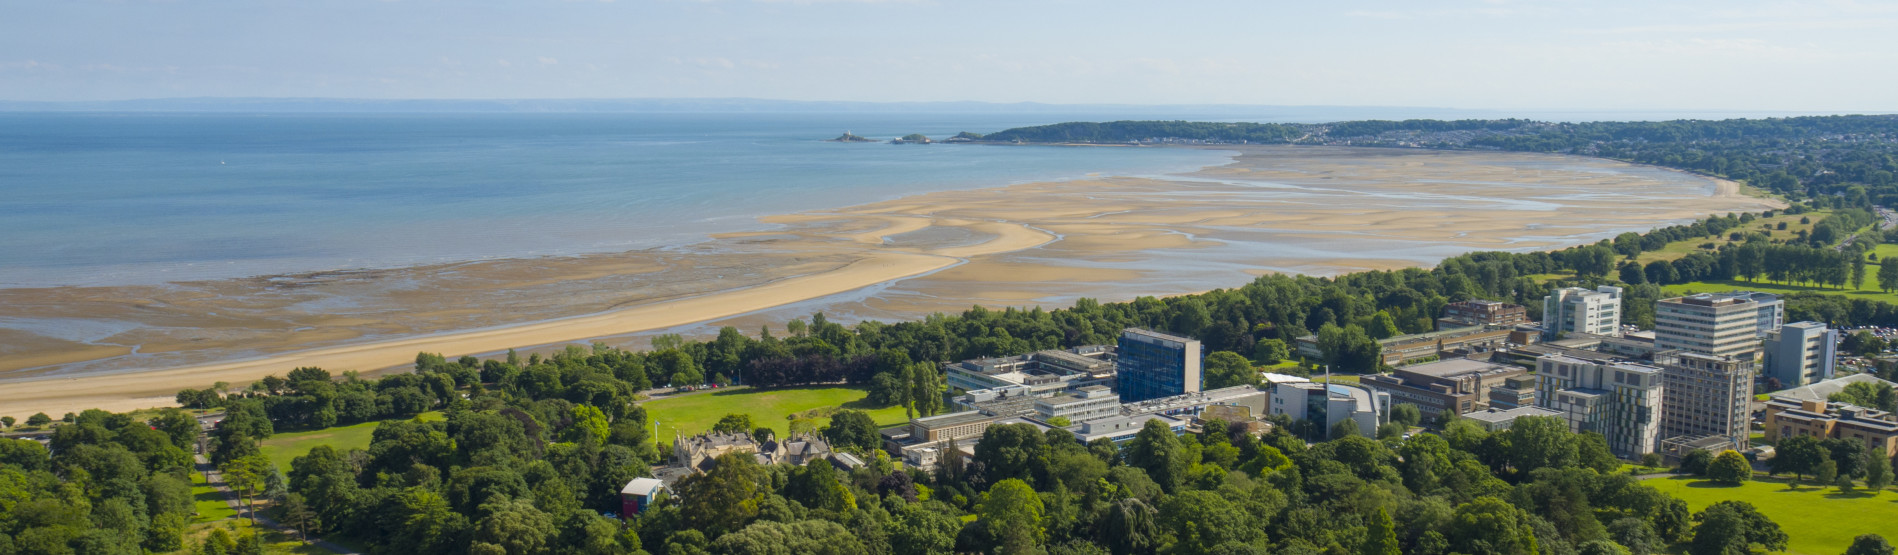 Aerial view of Swansea University's Singleton campus and Swansea landscape